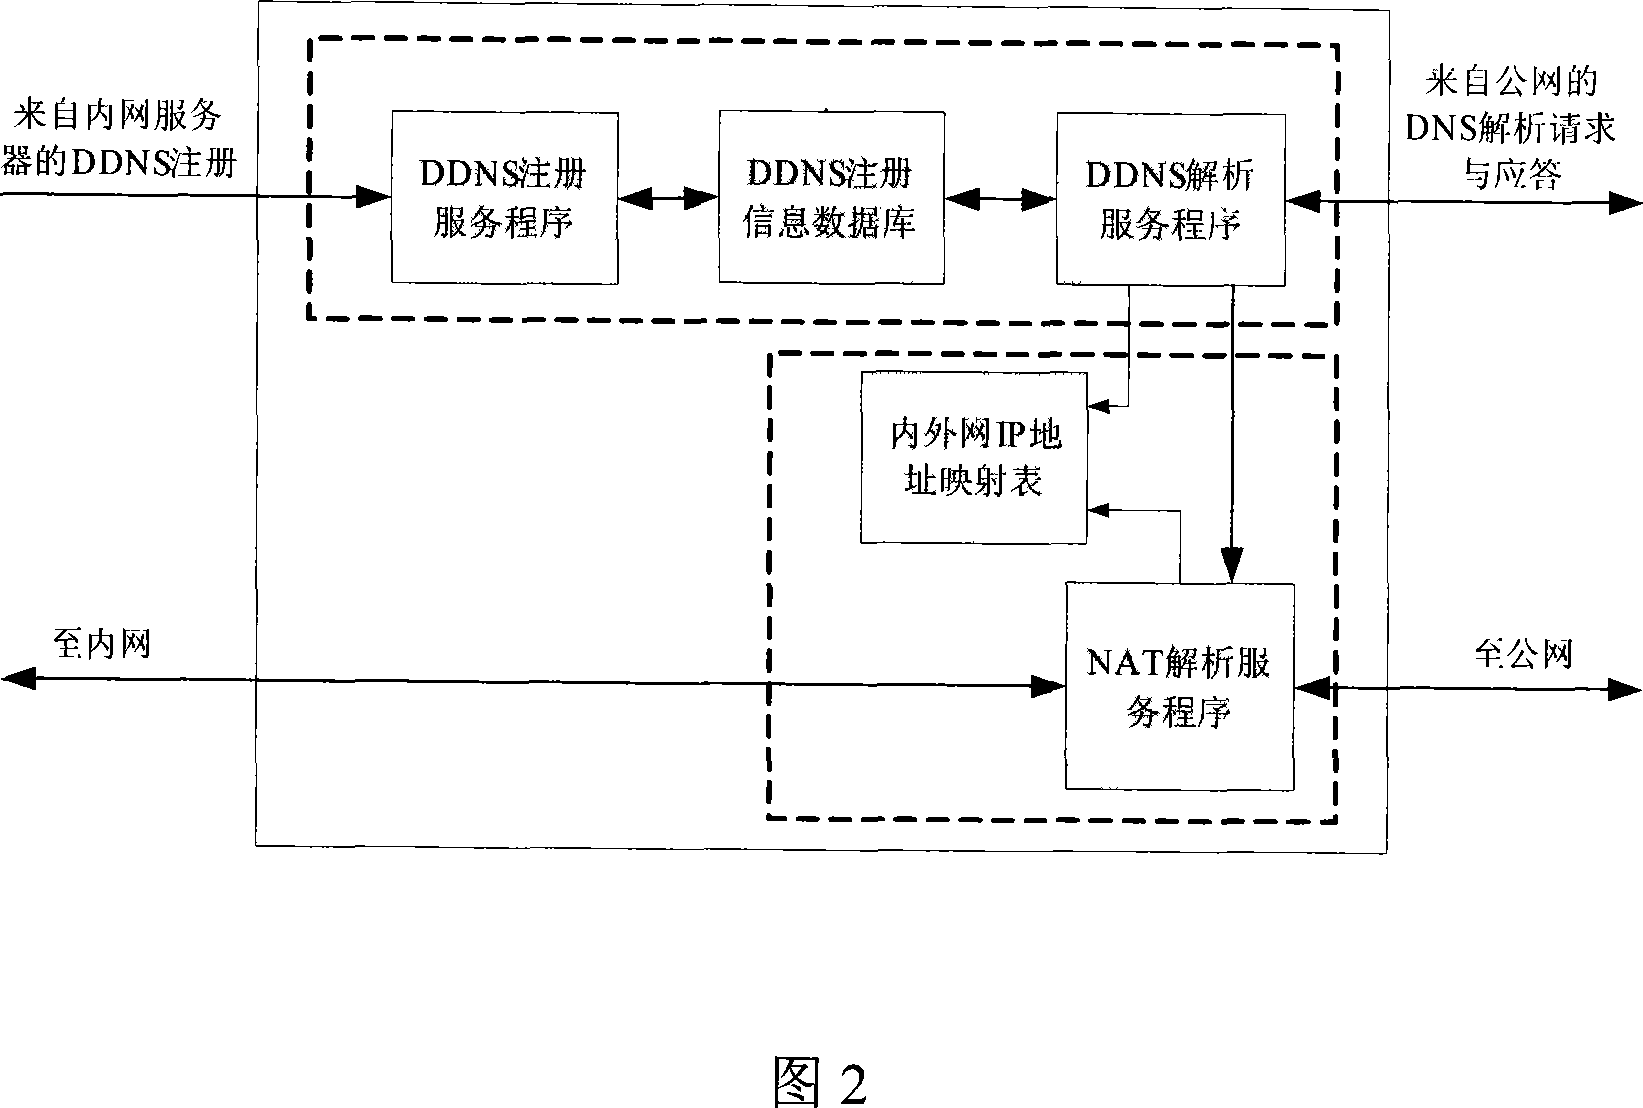 Method for mapping dynamically inside and outside network of server based on DDNS and NAT